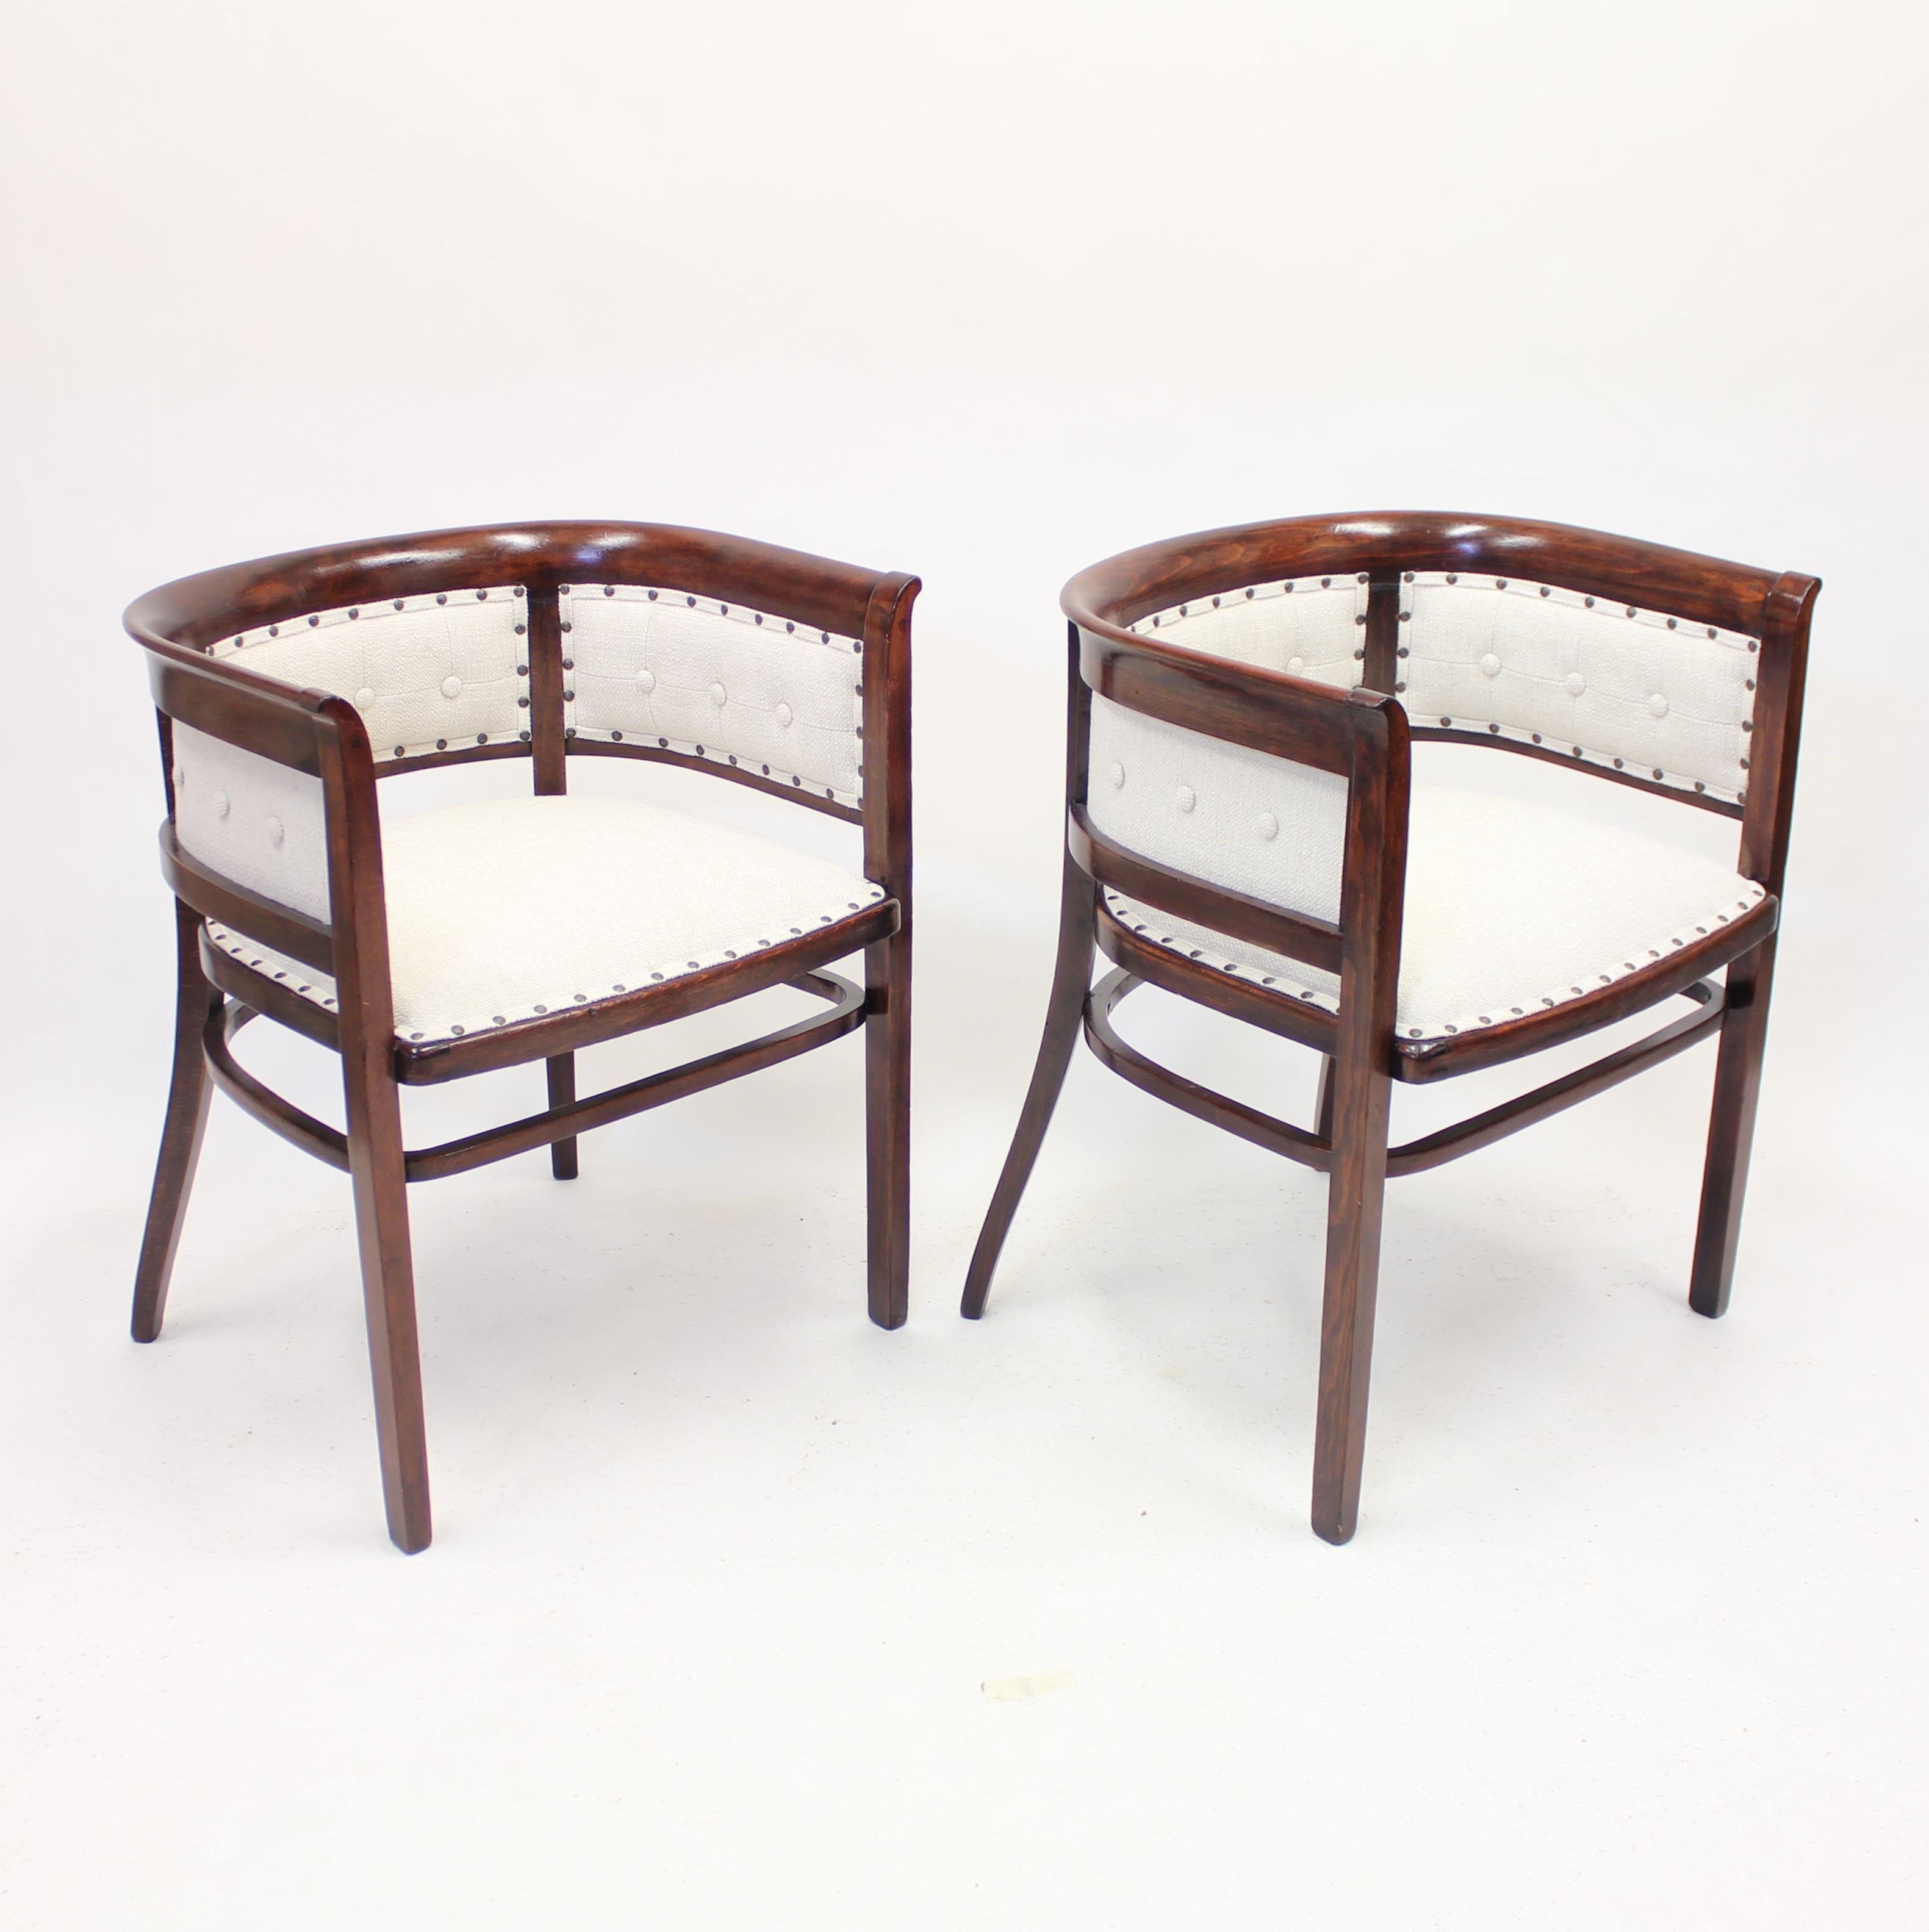 Fabric Pair of Fischel Armchairs, in the Style of Josef Hoffmann, Early 20th Century